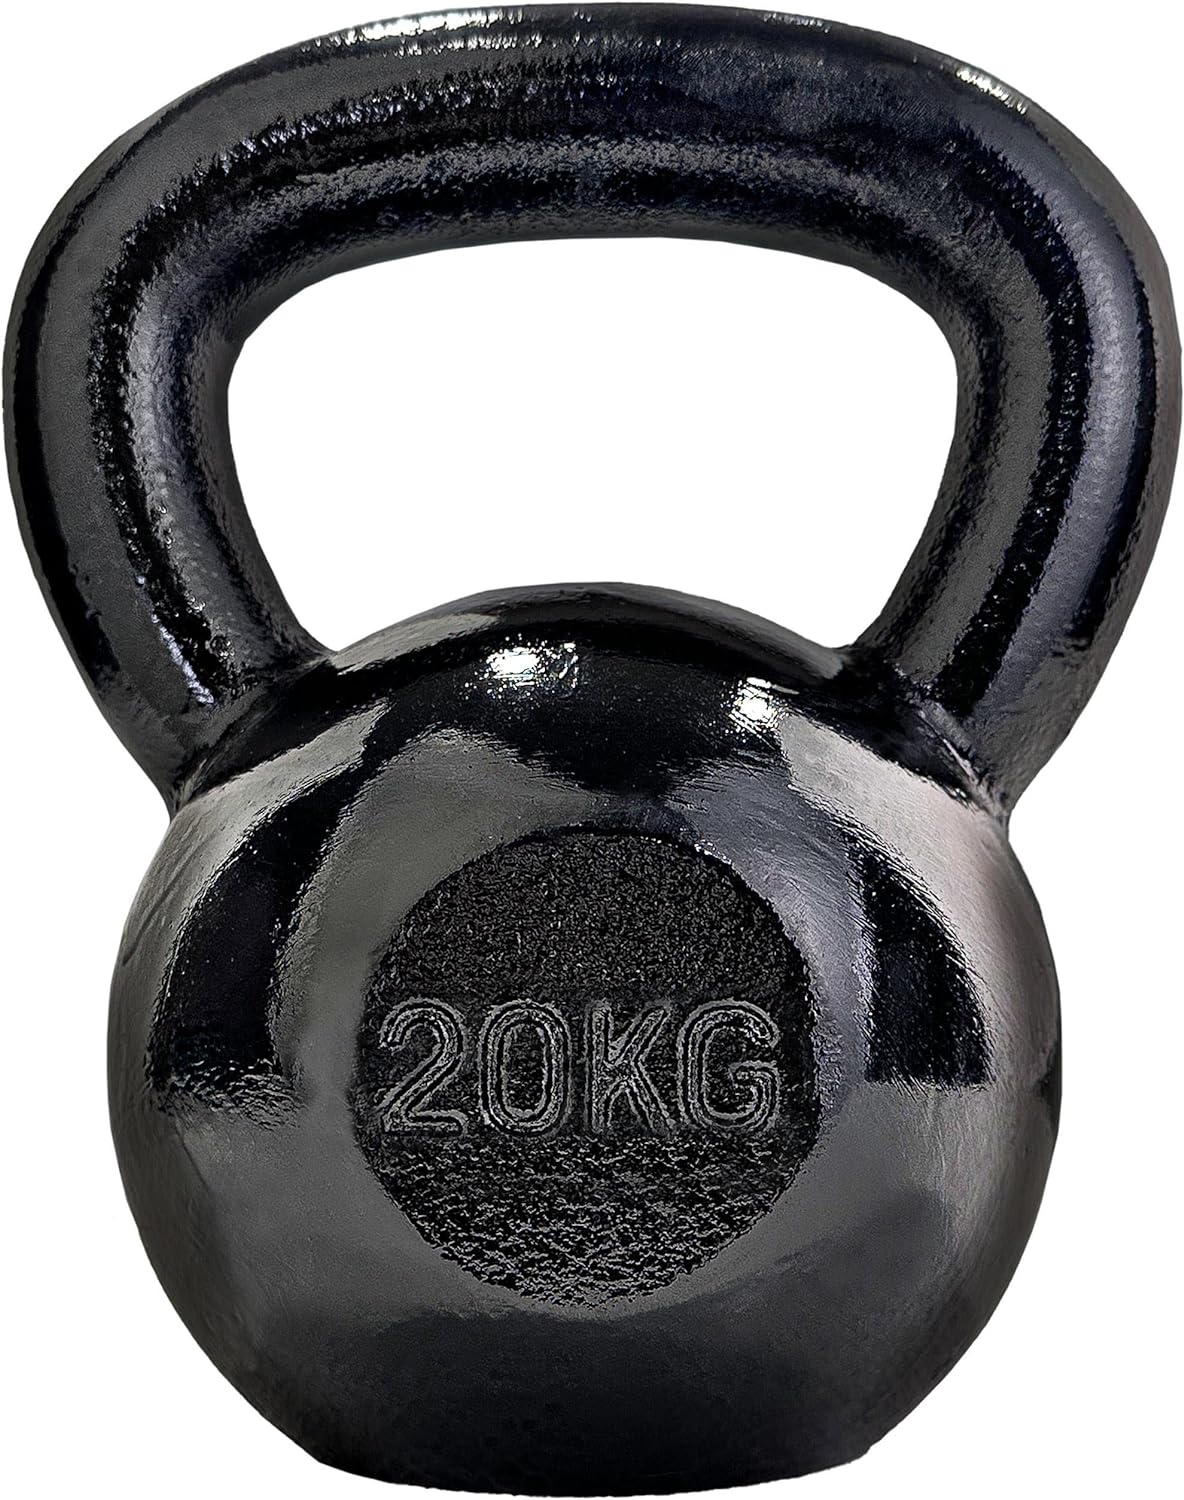 ScSPORTS® - Cast Iron Kettlebell - Durable - Body Training